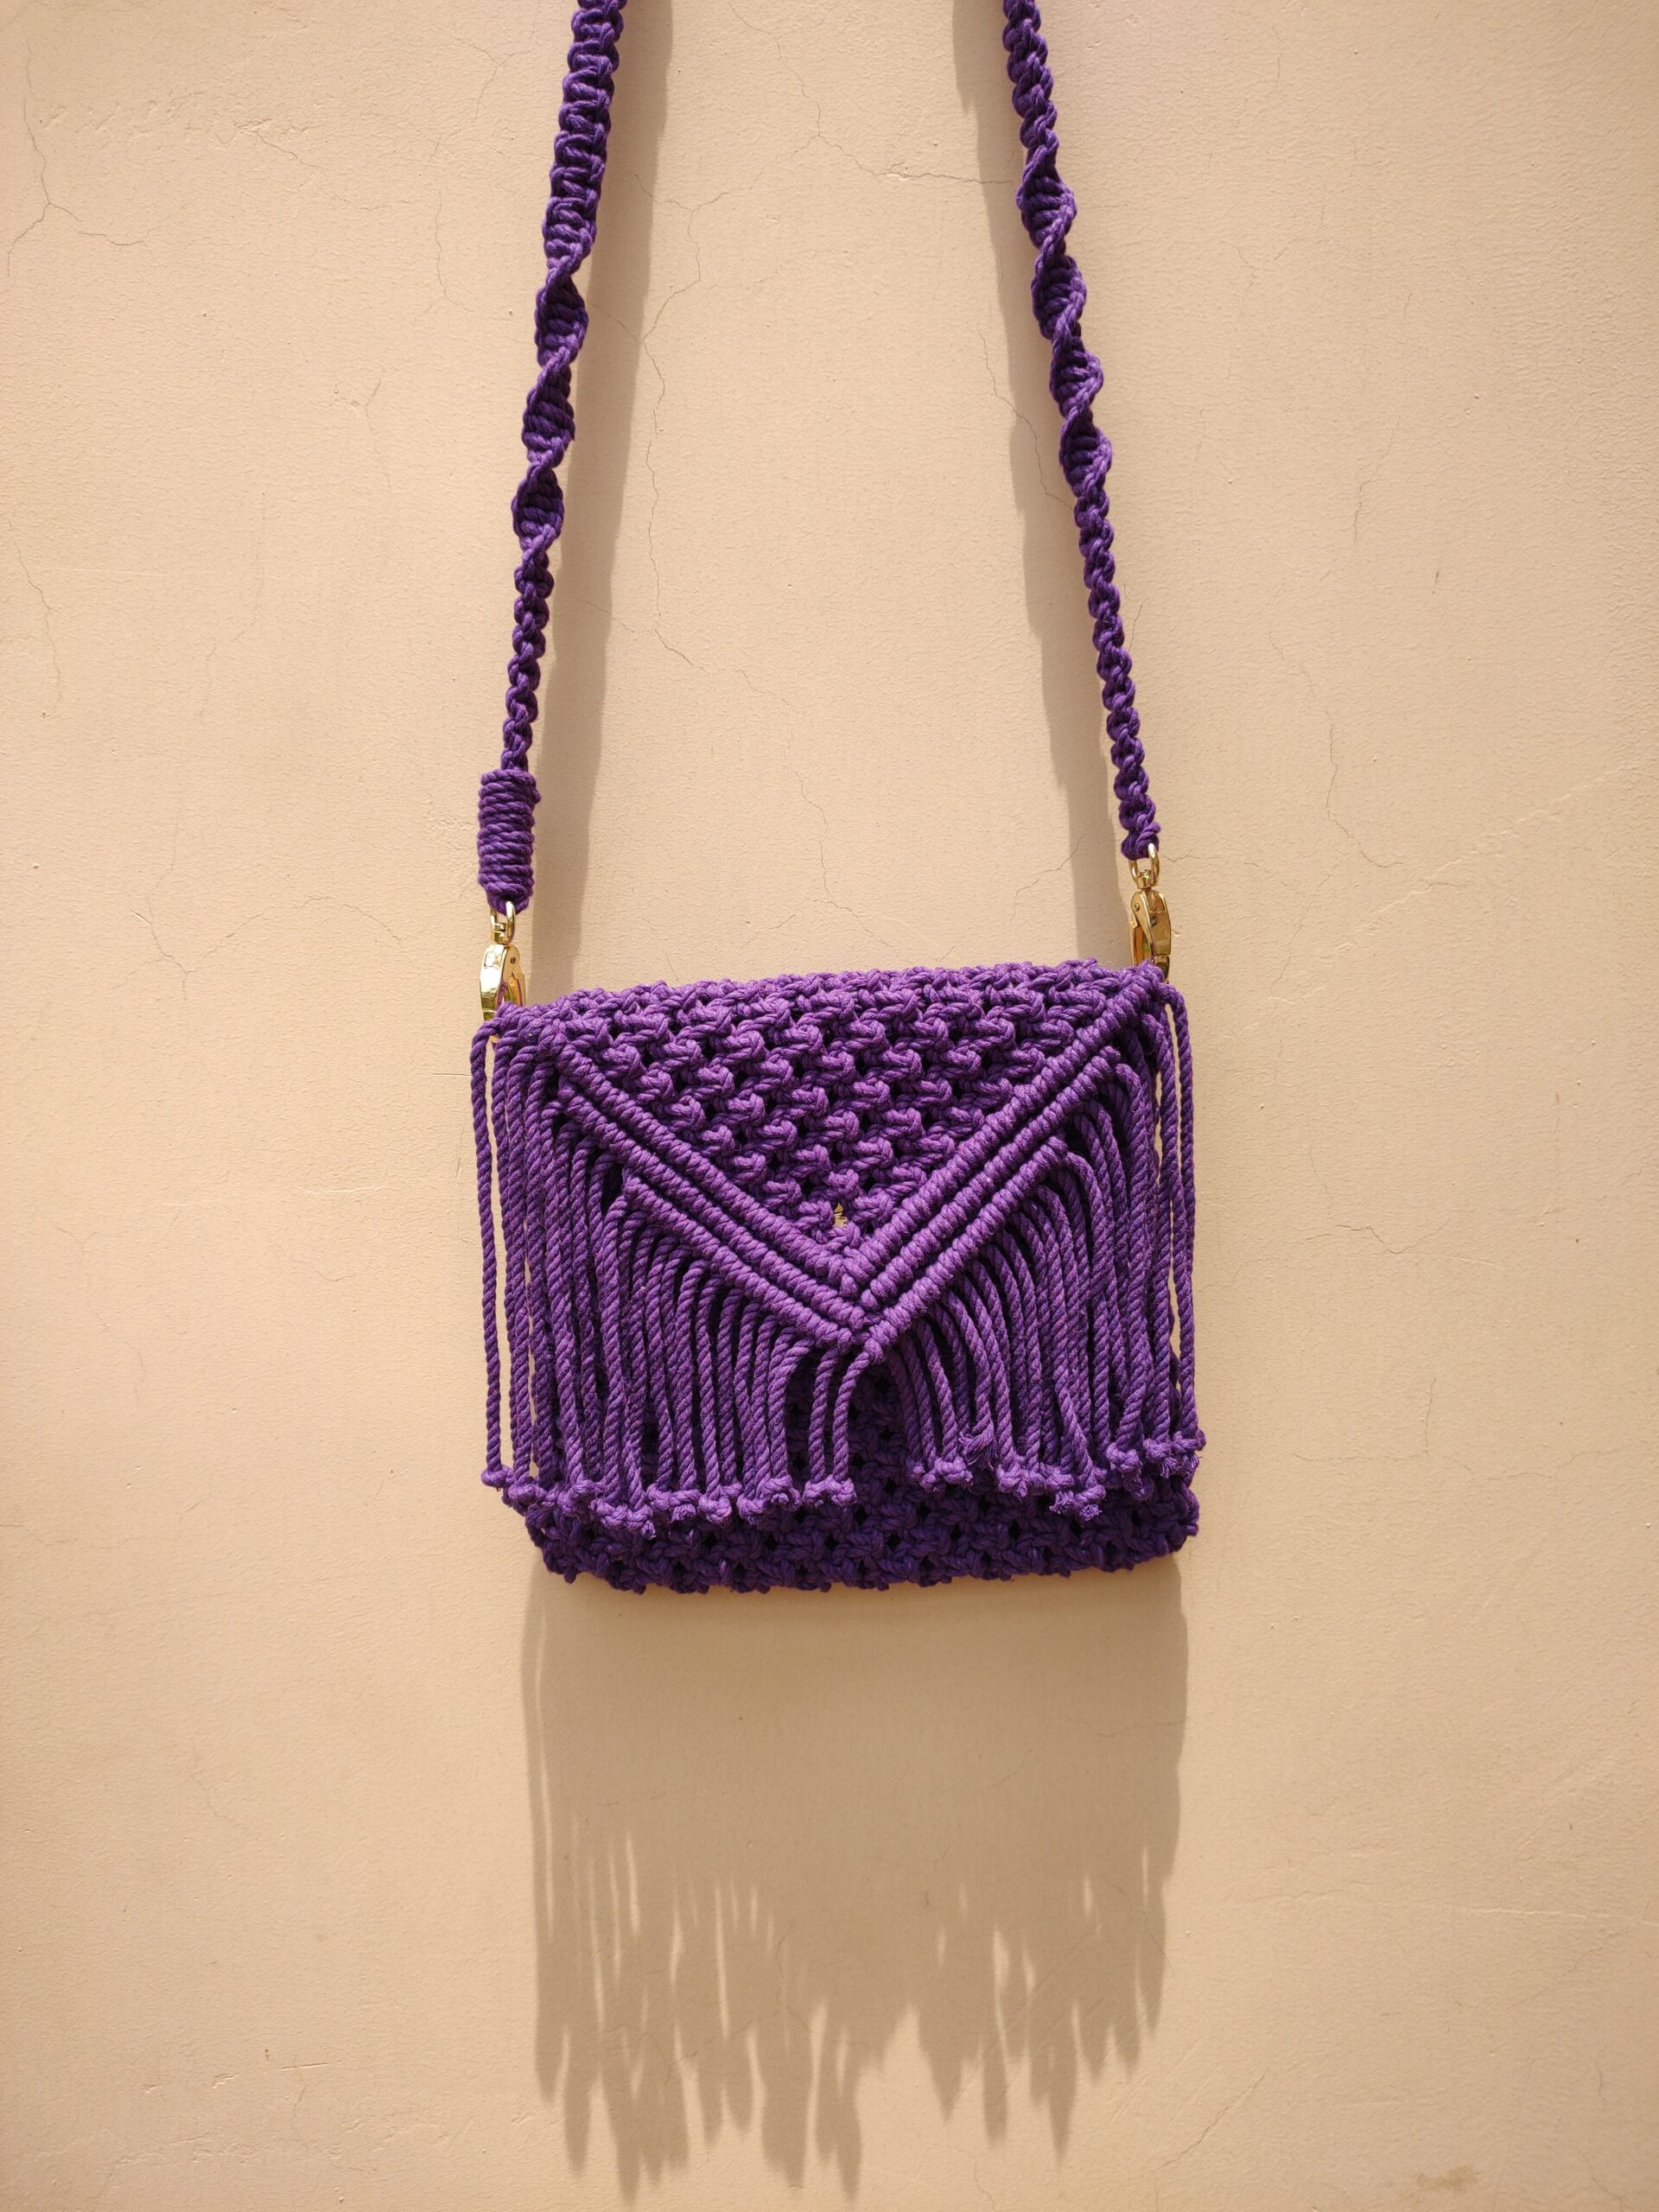 How to Make a Bohemian Macrame Clutch in 6 Easy Steps : 6 Steps (with  Pictures) - Instructables